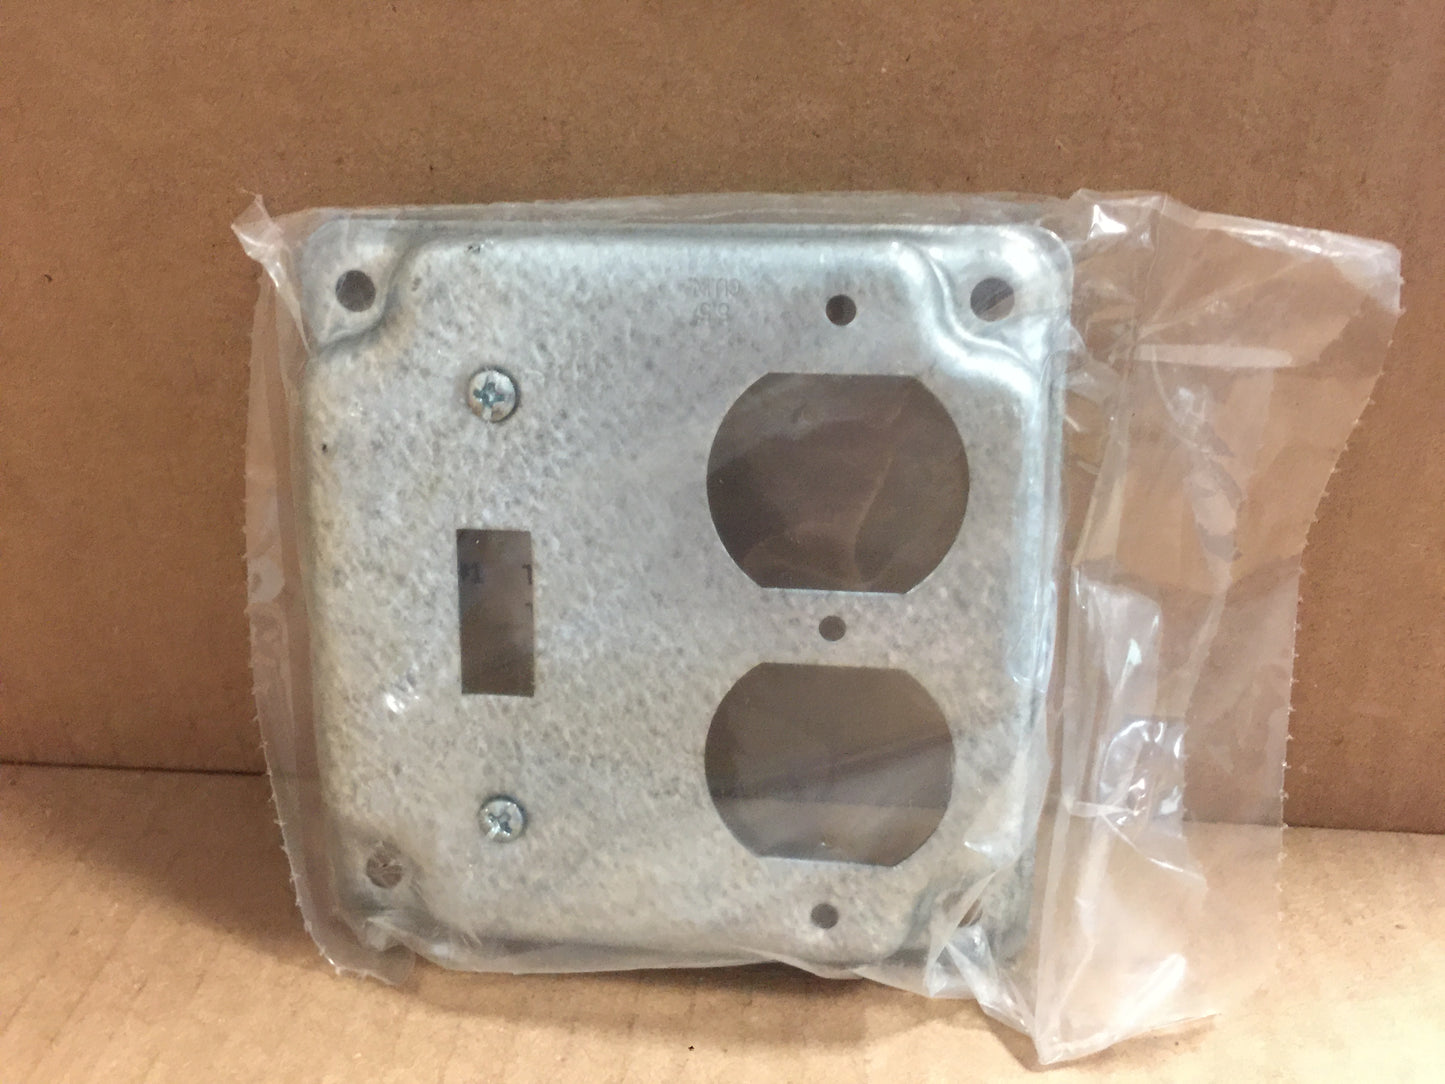 4" FLAT STEEL OUTLET COVER; ONE SWITCH AN ONE DUPLEX RECEPTACLE, SOLD AS 50PK